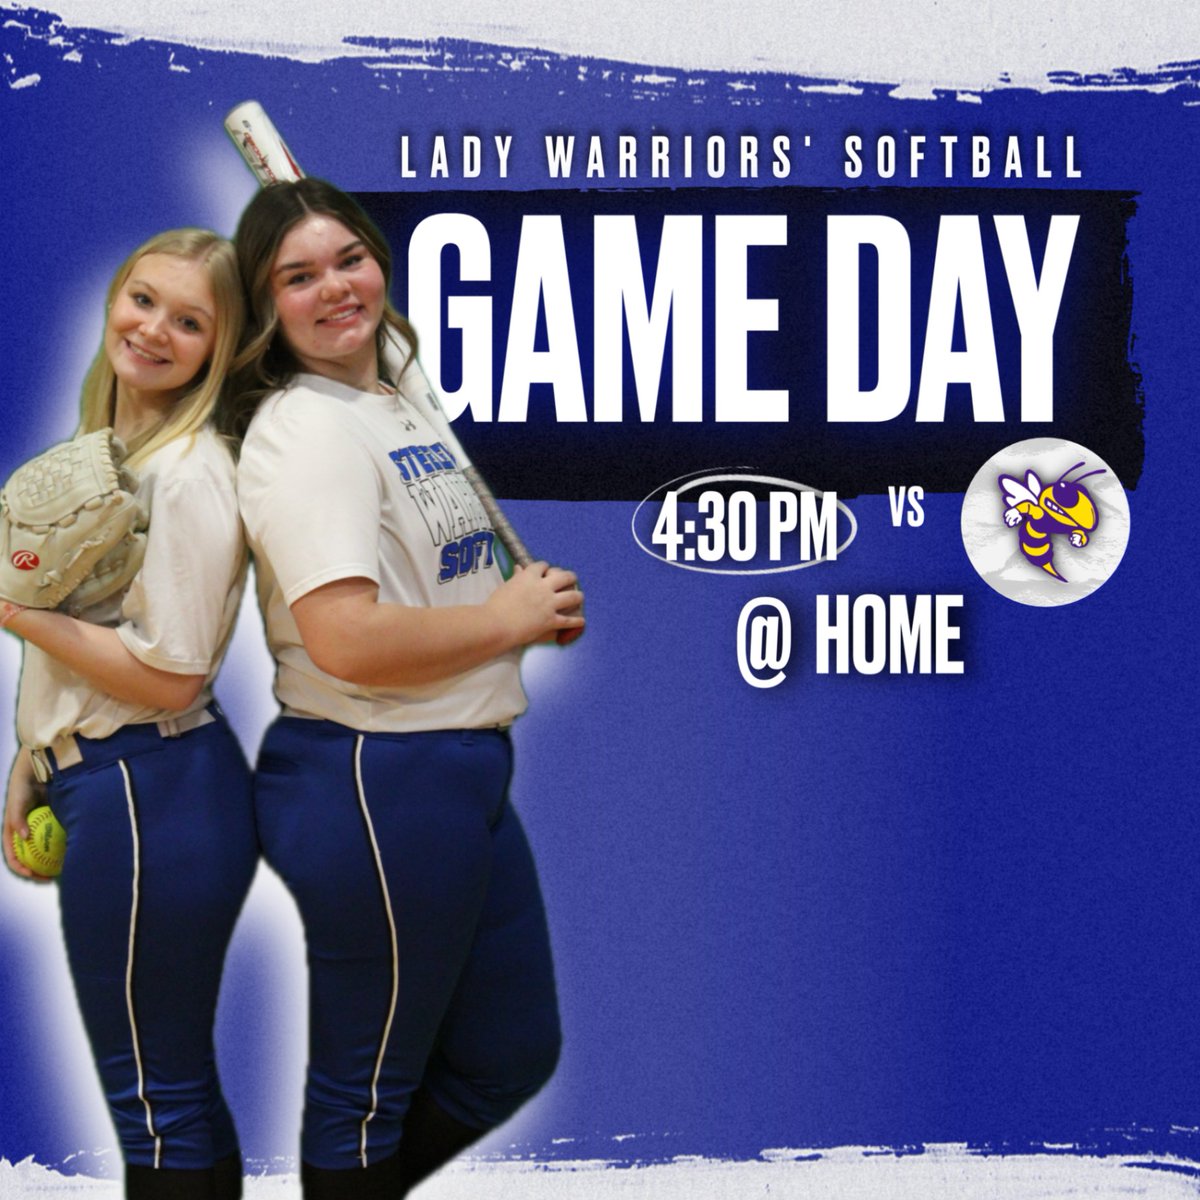 The Lady Warriors are gearing up to take on the New Athens Yellow Jackets, today at 4:30 pm! #WarriorNation